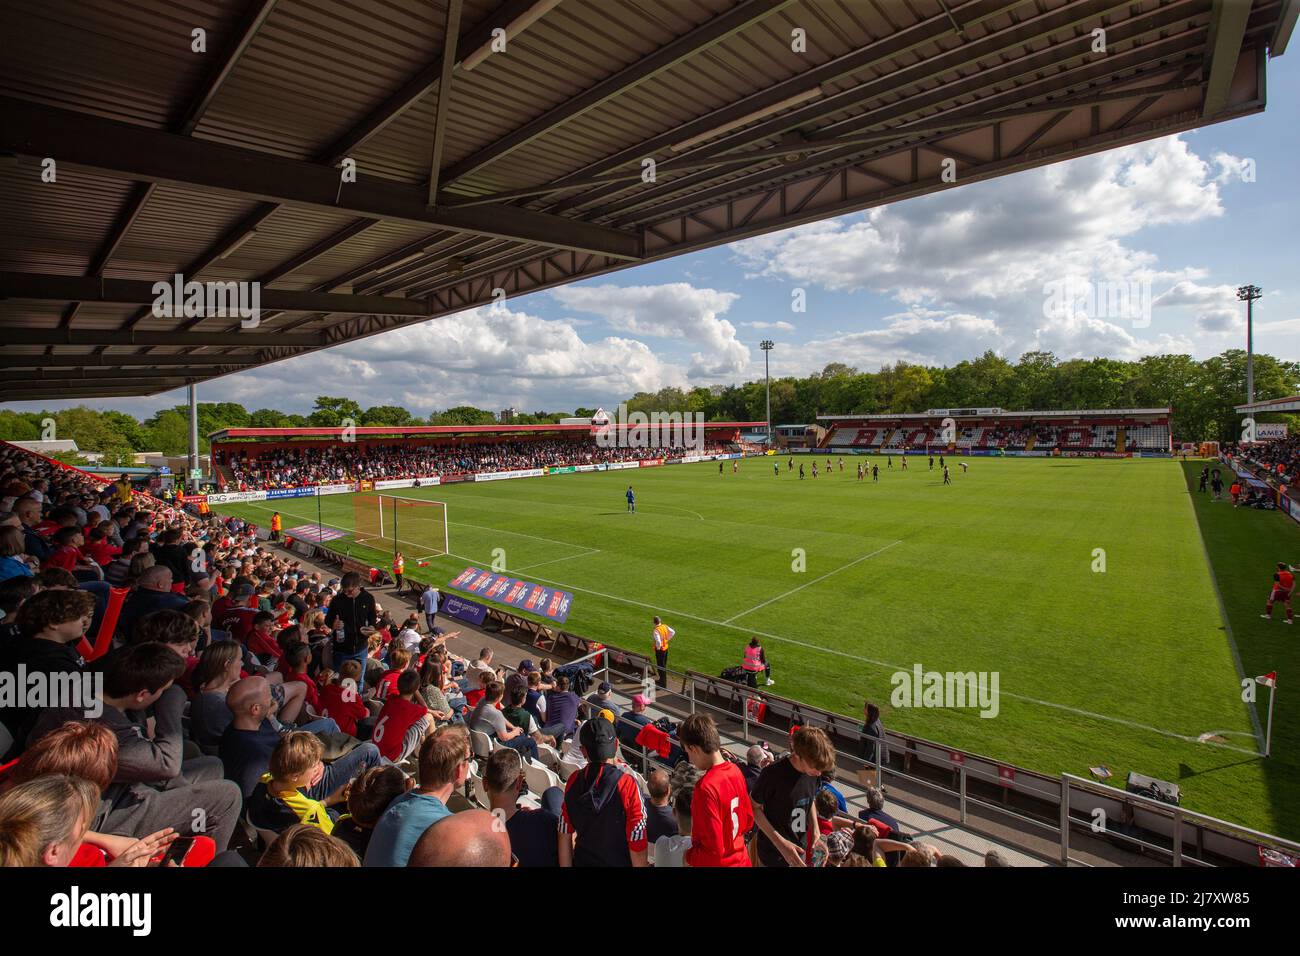 General view looking out onto the pitch at The Lamex Stadium, home of Stevenage Football Club from the North Stand  during match Stock Photo